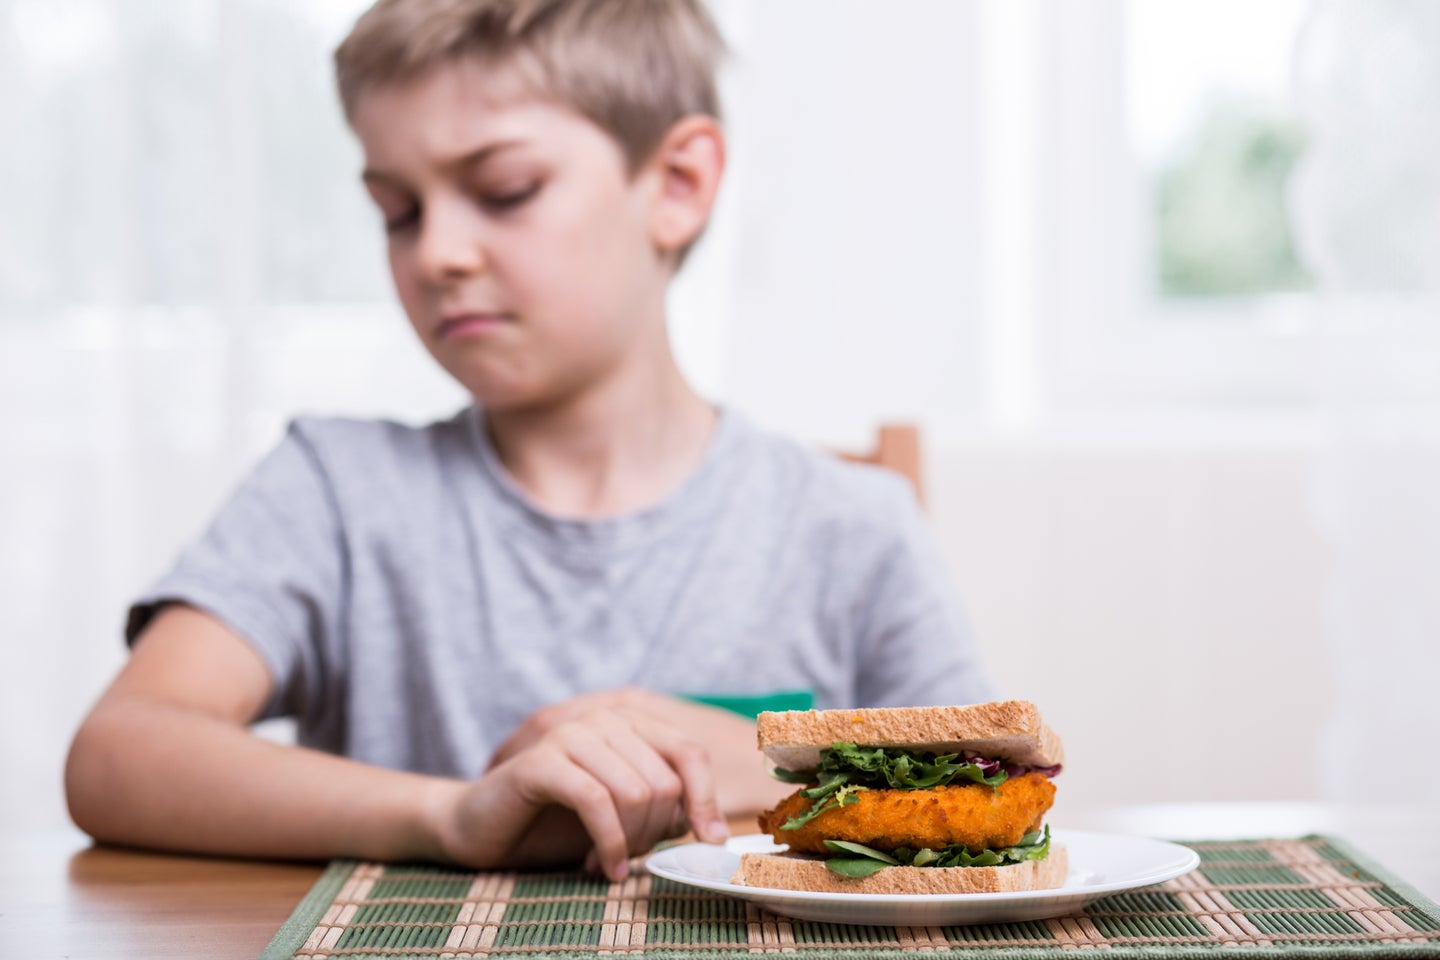 Kid with short blond hair and gray sports shirt turning away from a sandwich on a white plate on a wooden table because of a diet